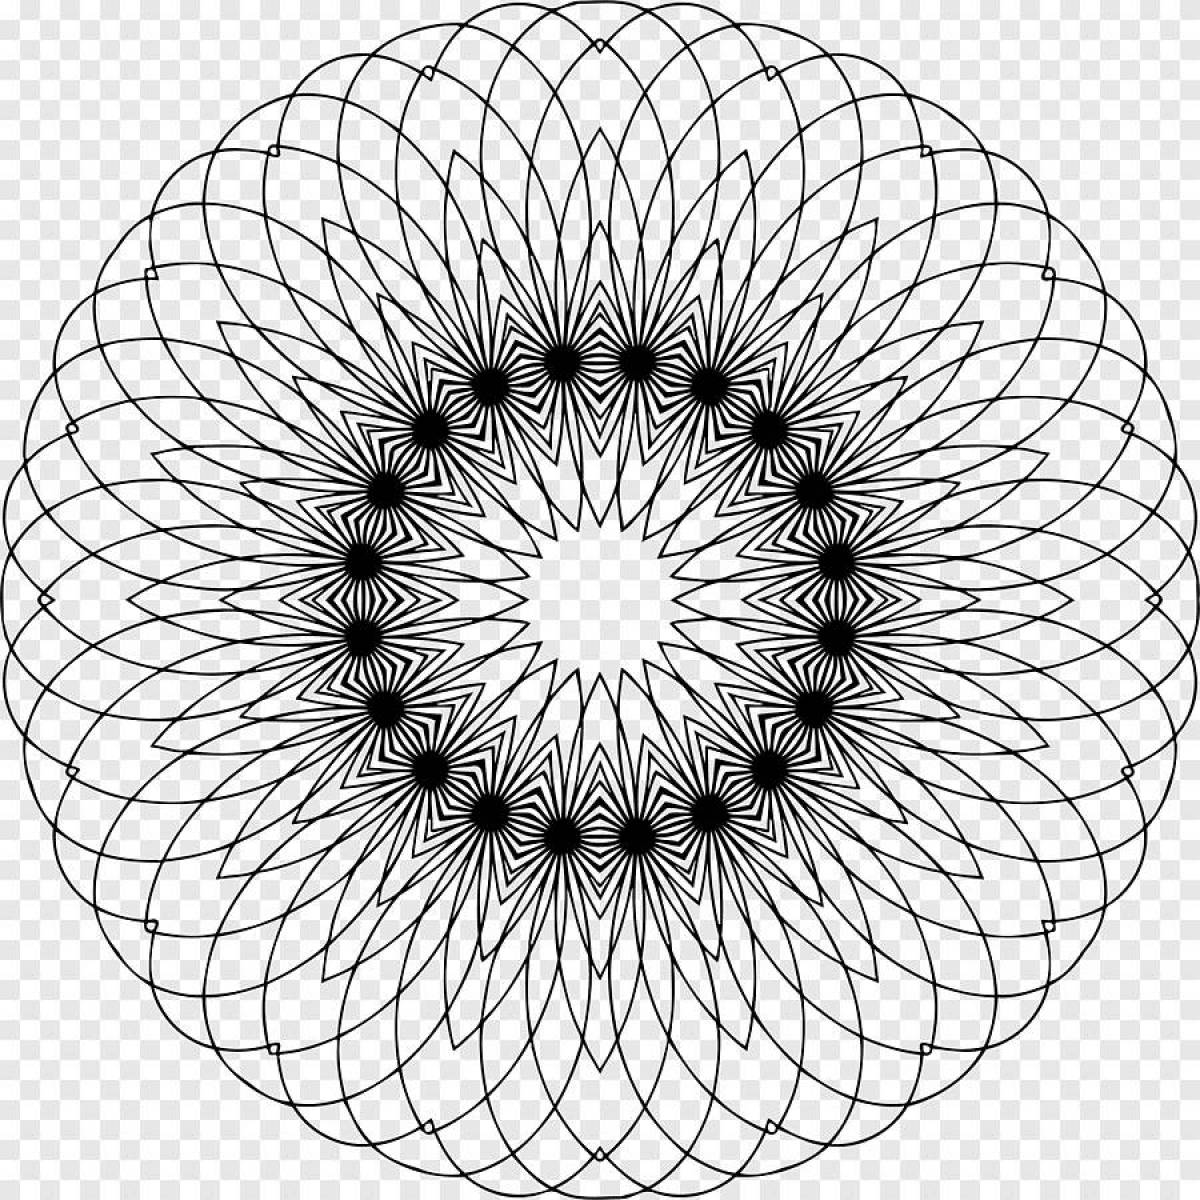 Animated coloring in a circle in a spiral